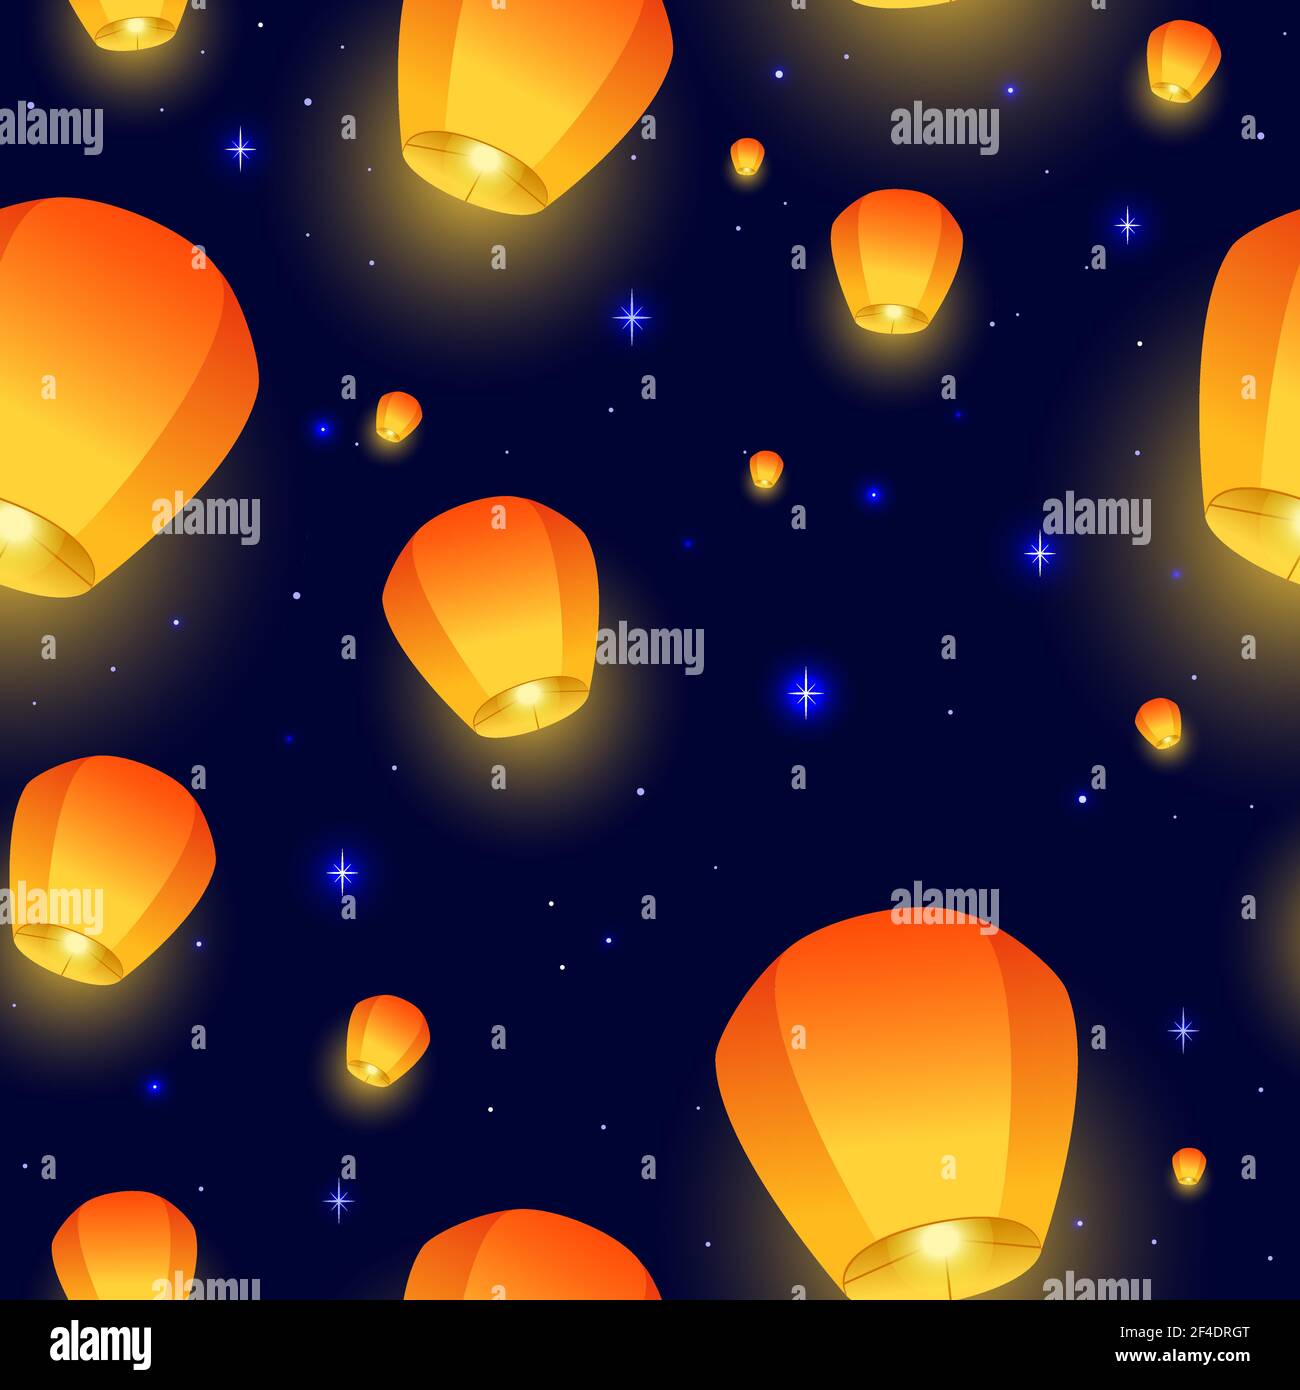 Flying Sky lanterns seamless pattern. Diwali festival, Mid Autumn Festival or Chinese festive. Luminous floating lamps in the night sky. Vector illustration for wrapping paper, fabric, wallpaper. Vector illustration. Stock Vector